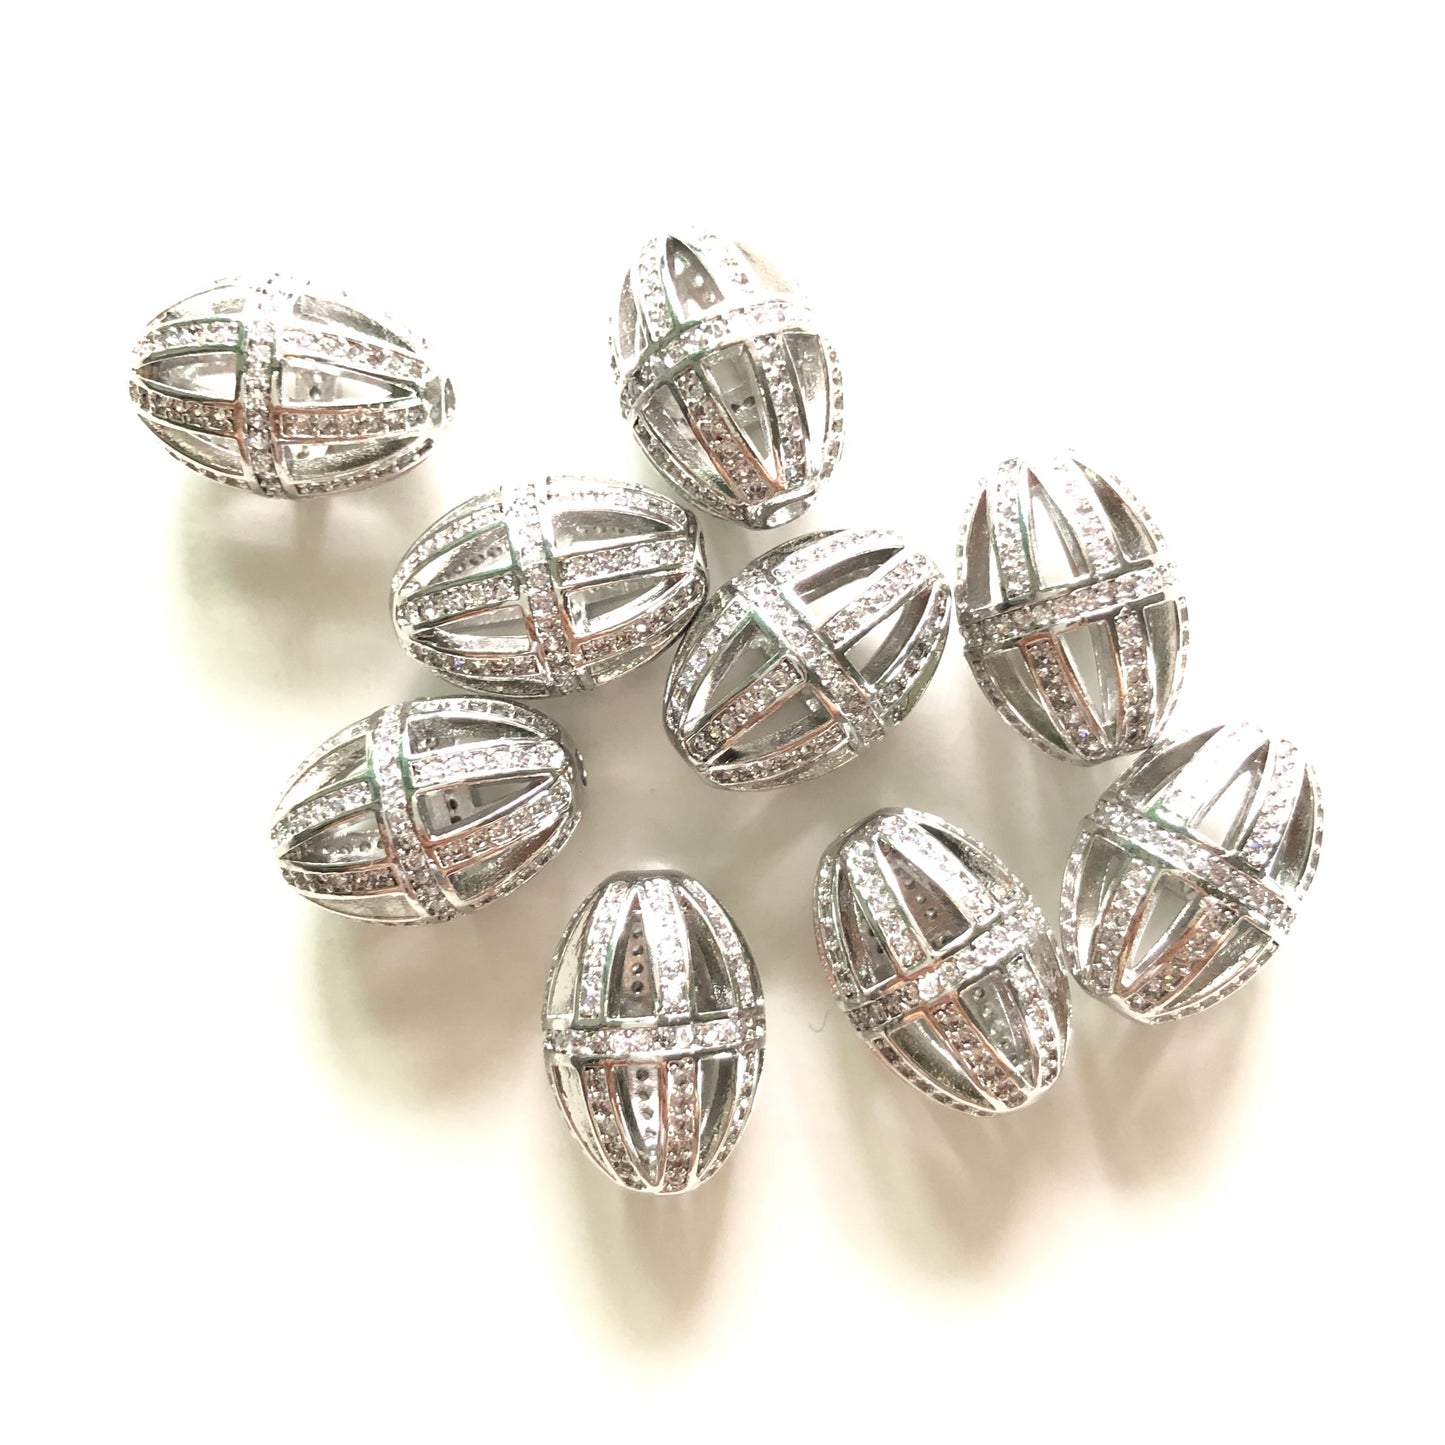 10pcs/lot 16.5*11.5mm CZ Paved Hollow Olive Beads Spacers Silver CZ Paved Spacers Oval Spacers Charms Beads Beyond